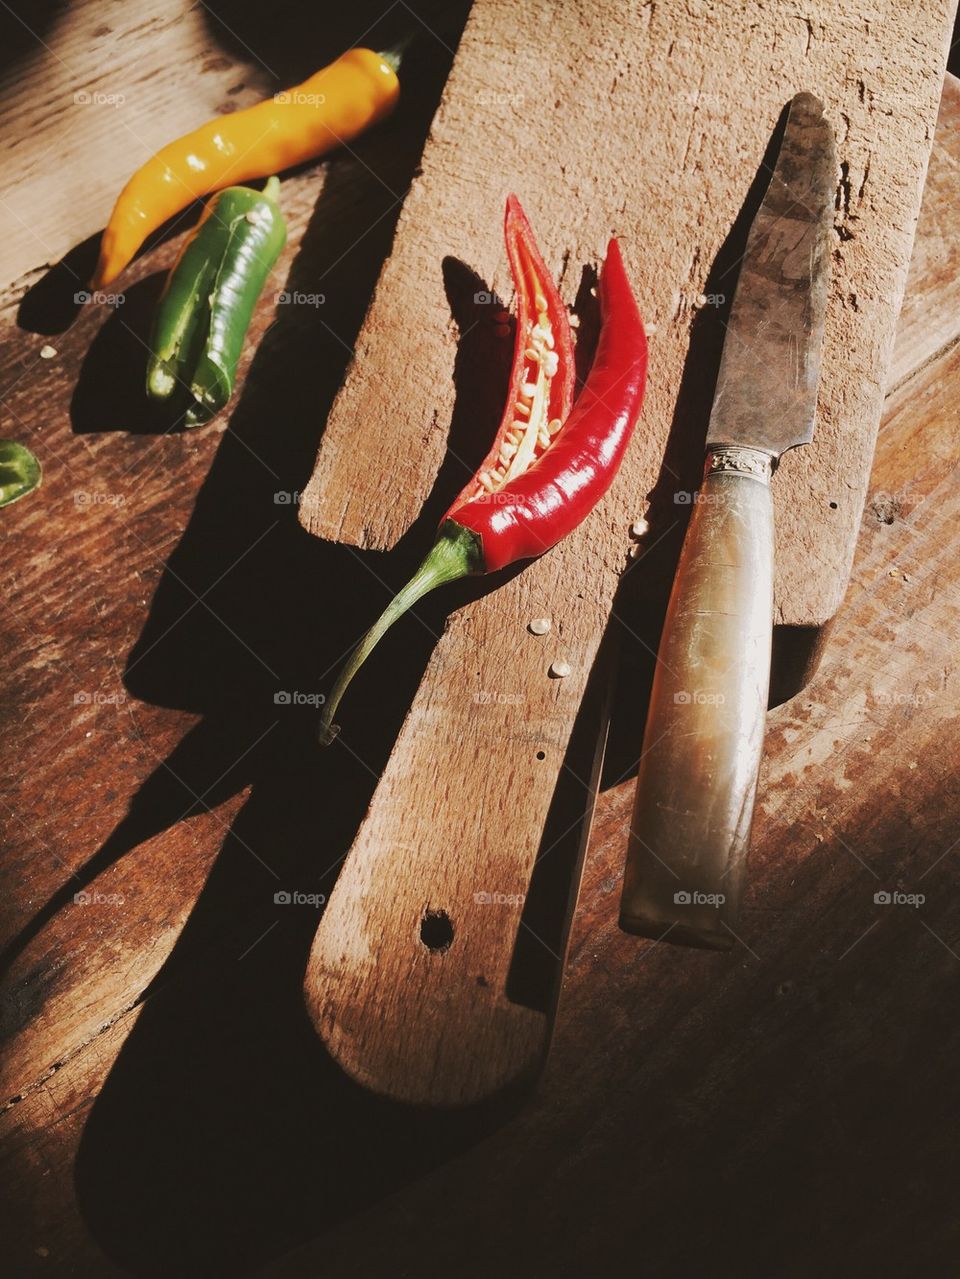 Chili pepper on old wooden cutting board